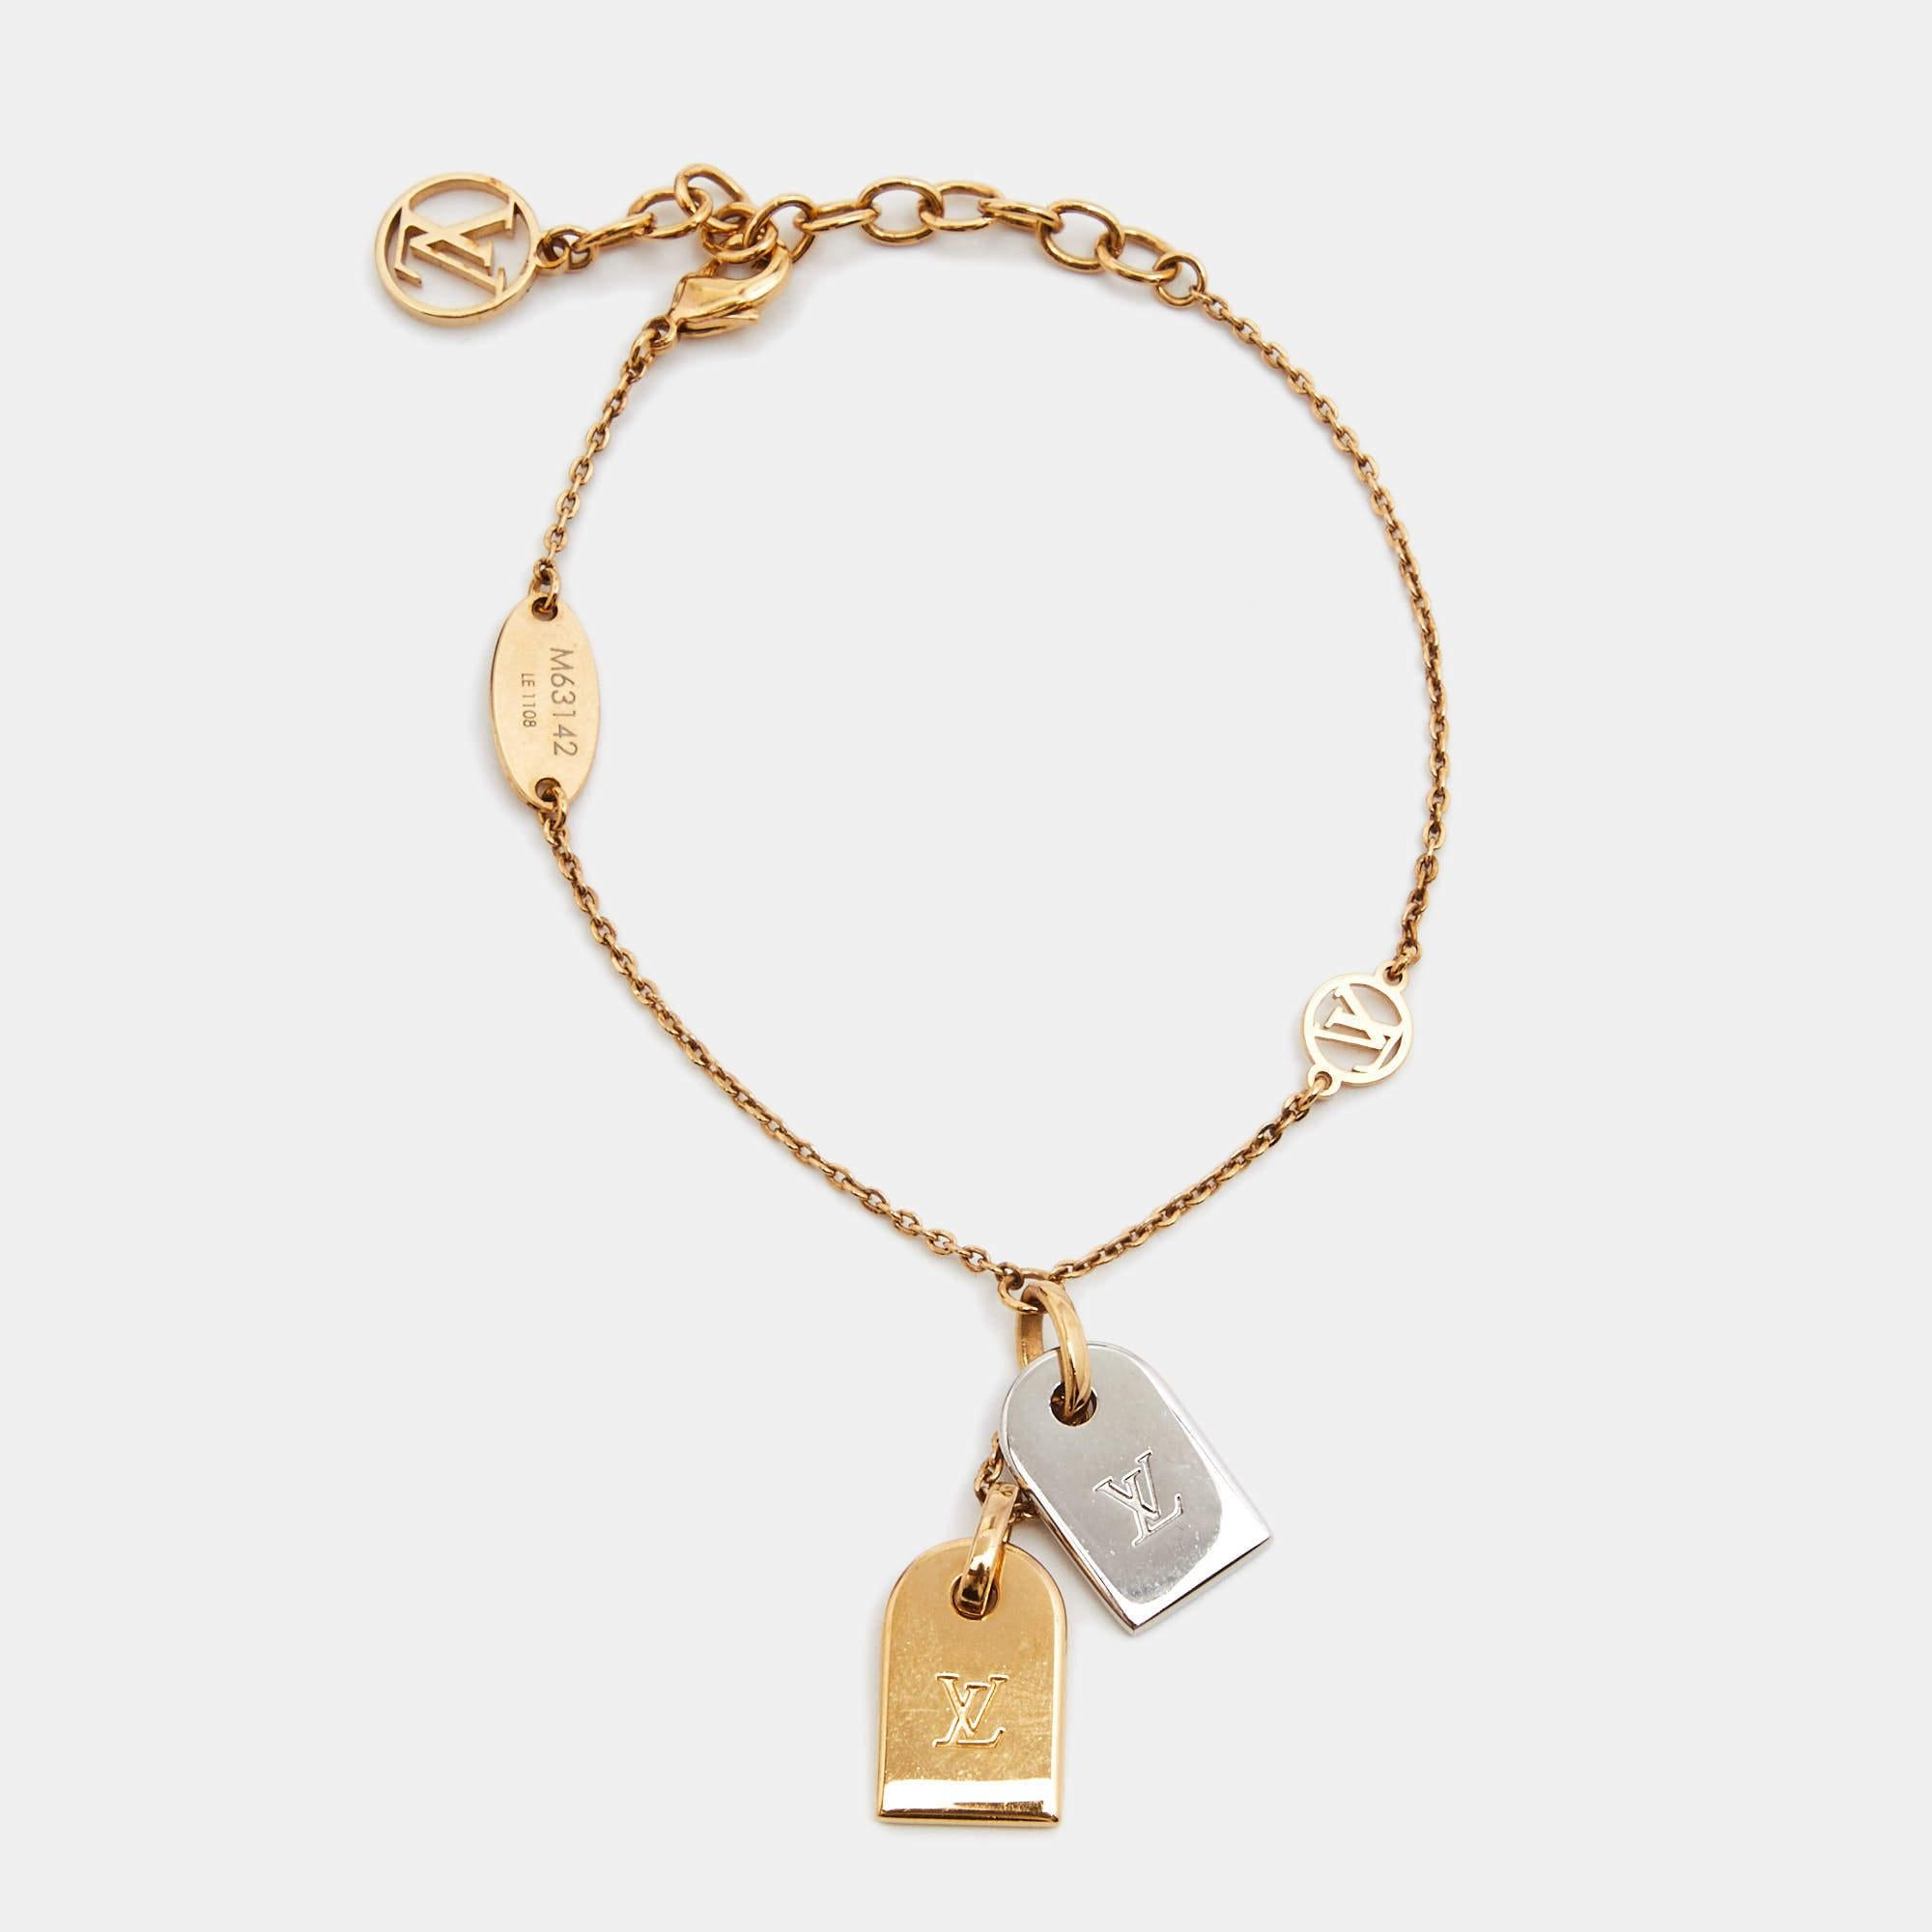 This Nanogram bracelet is packed with Louis Vuitton's famous elements, from the iconic initials to the timeless monogram pattern. The bracelet is crafted from two-tone metal and the chain holds two name tags.

Includes: Original Dustbag, Original Box